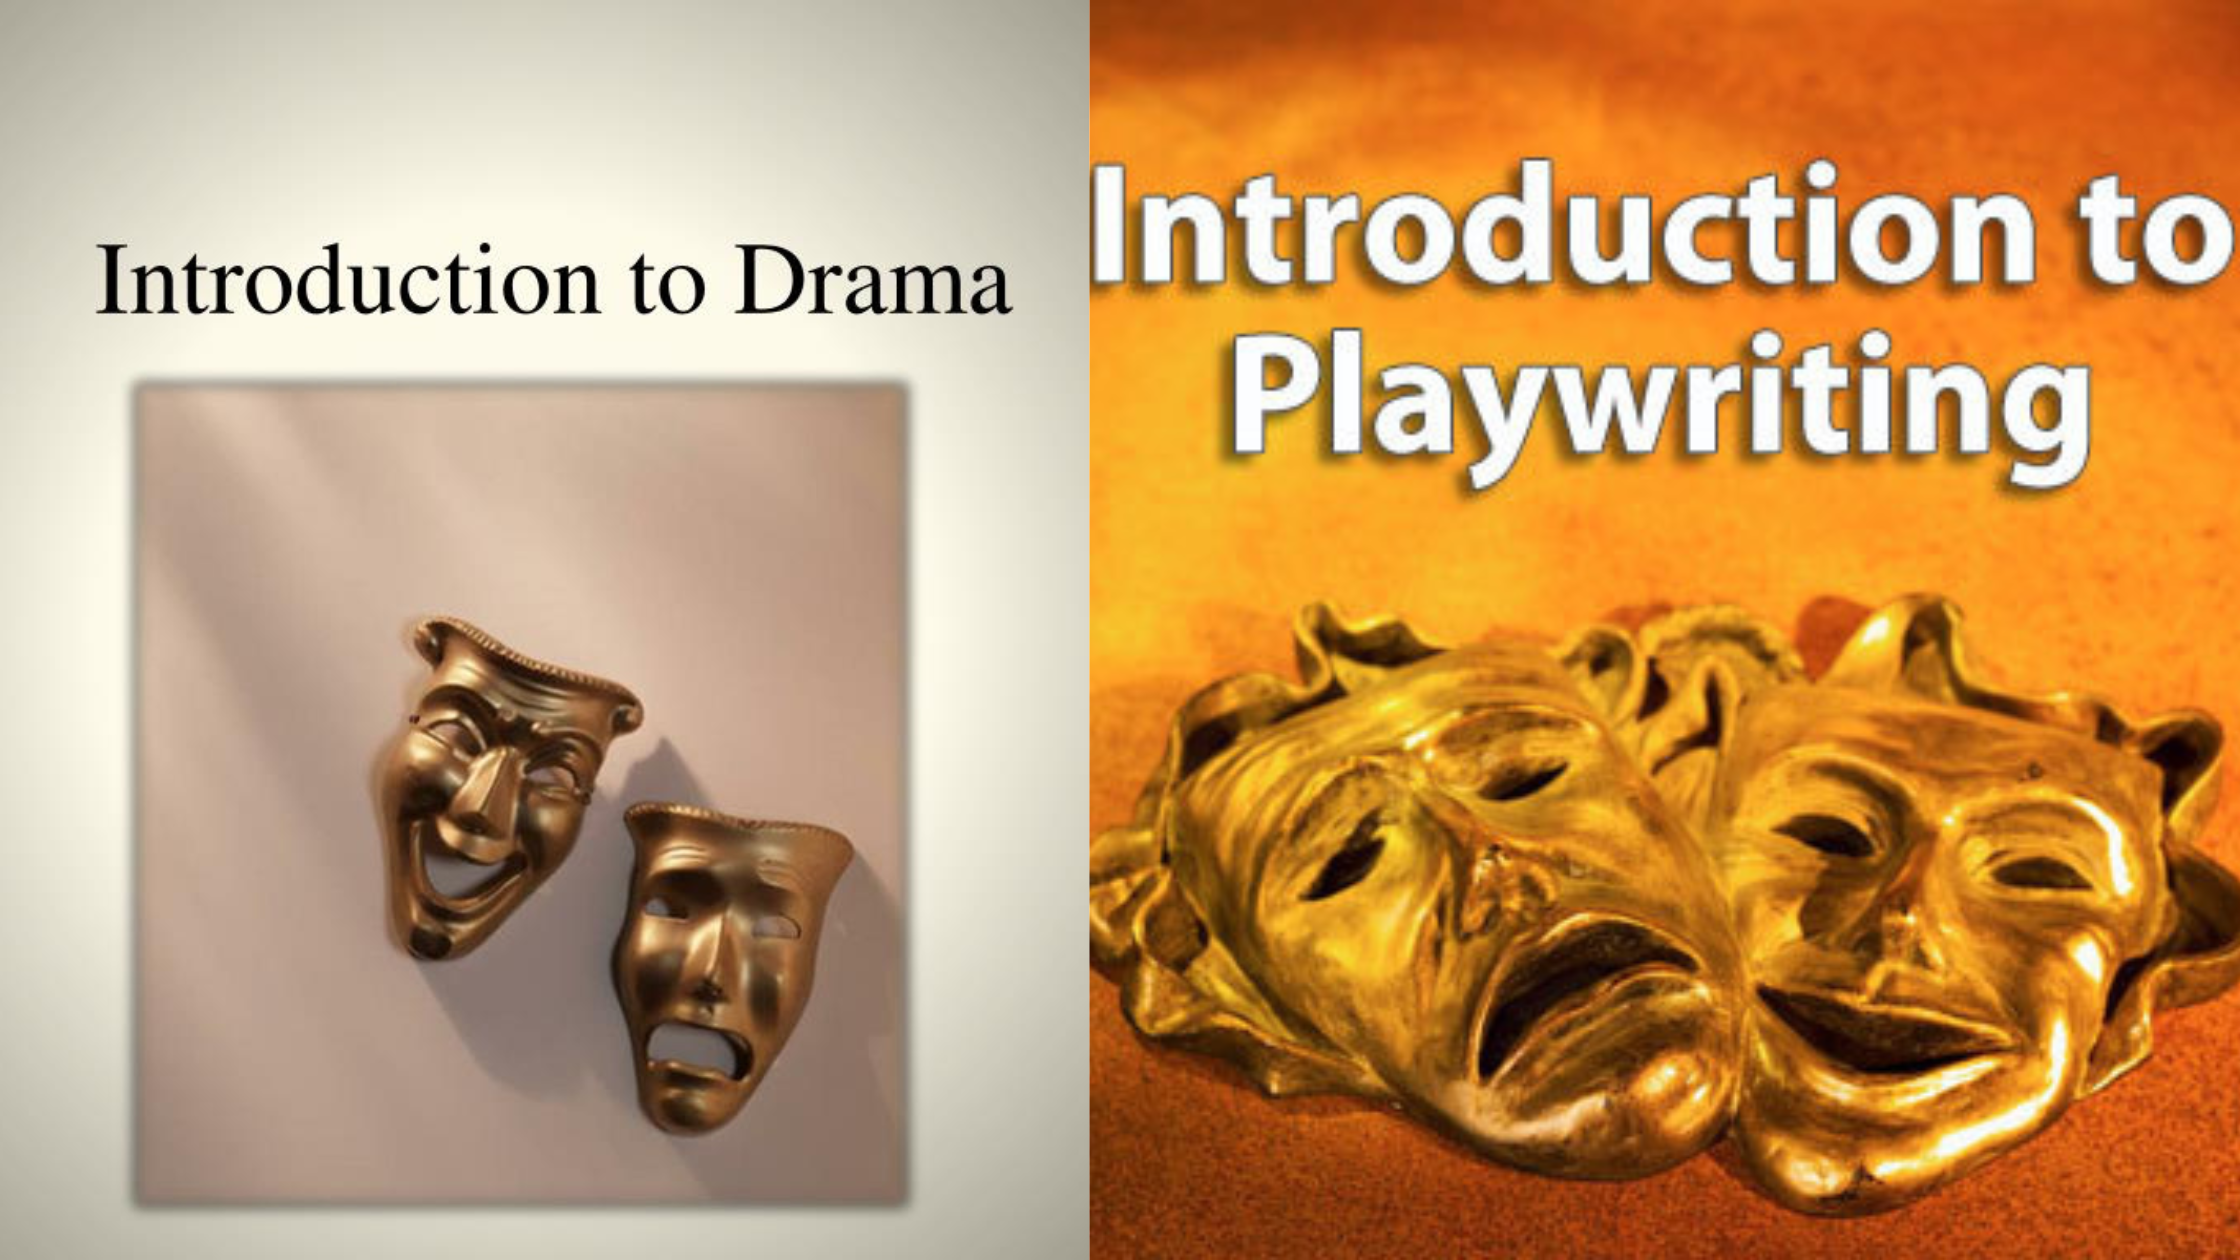 Introduction to Drama and Playwriting